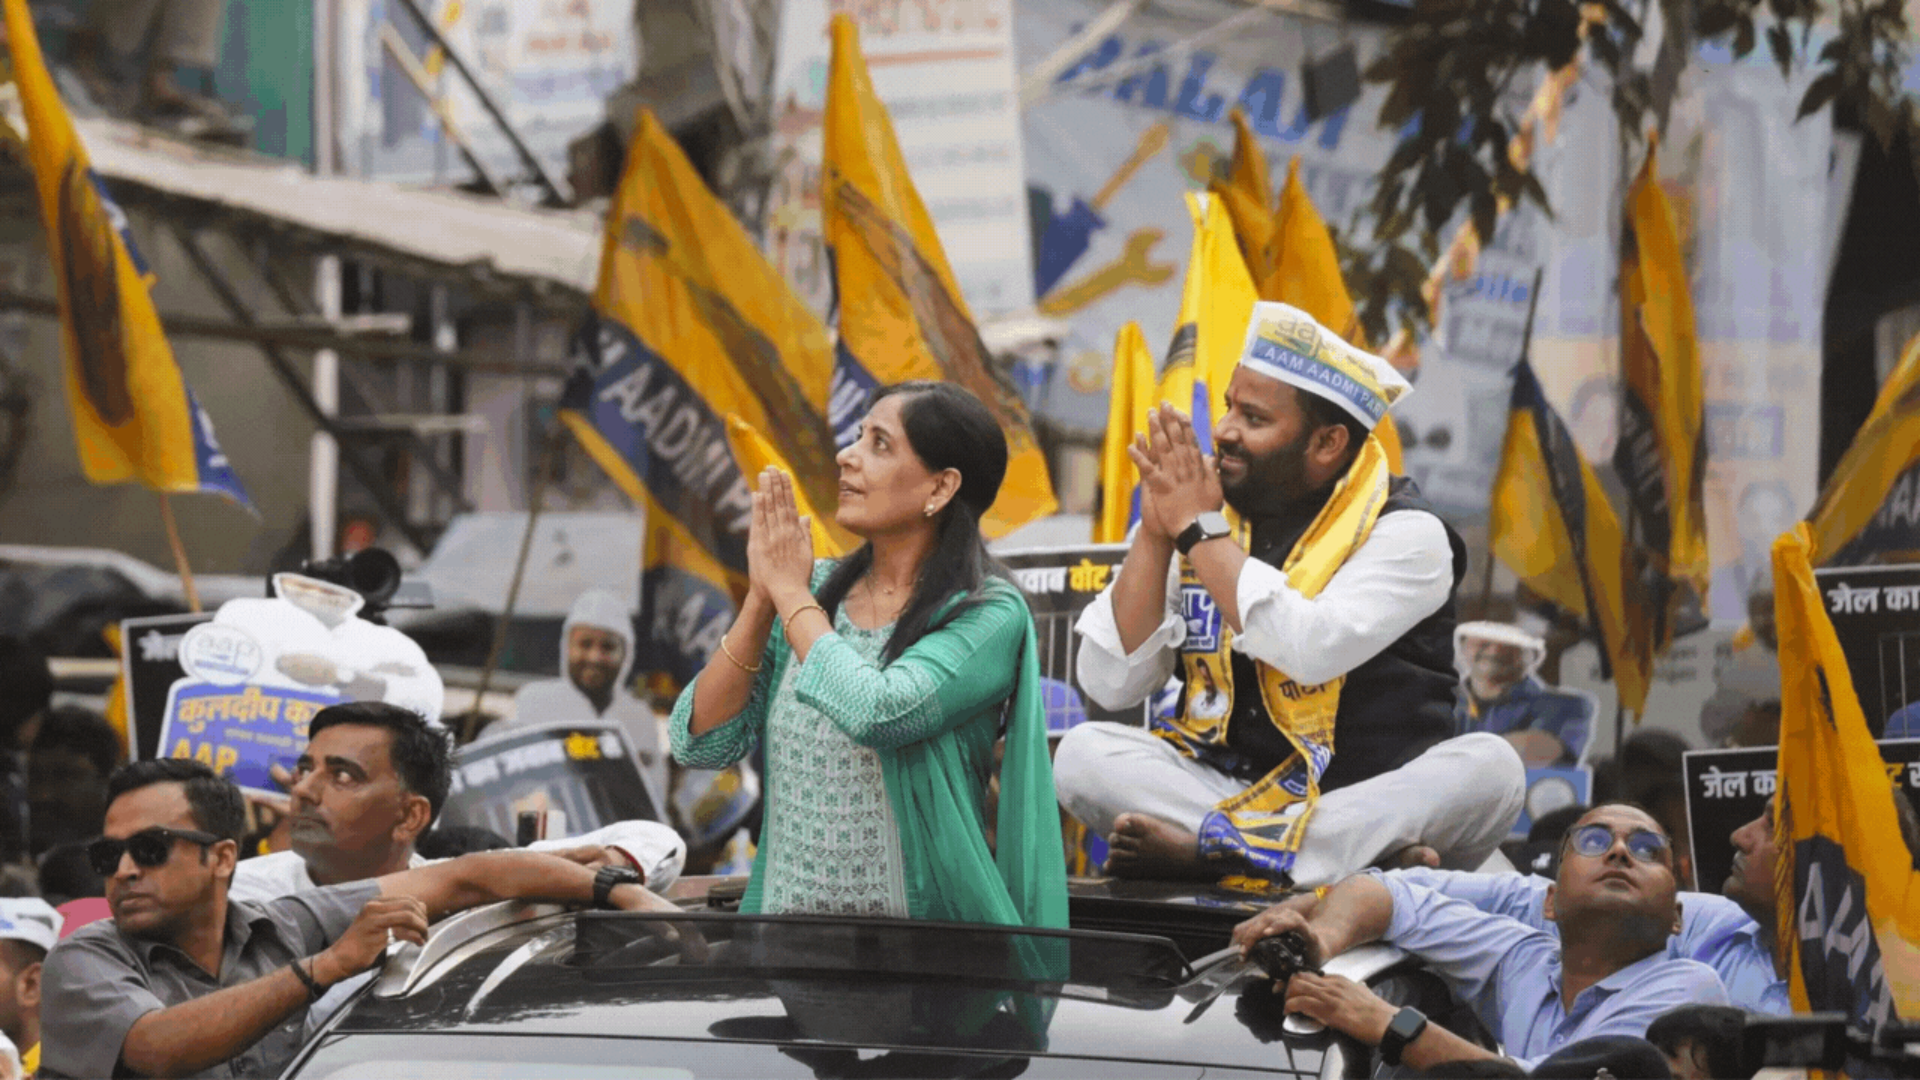 Sunita Kejriwal Leads Roadshow To Rally Support For AAP Candidate